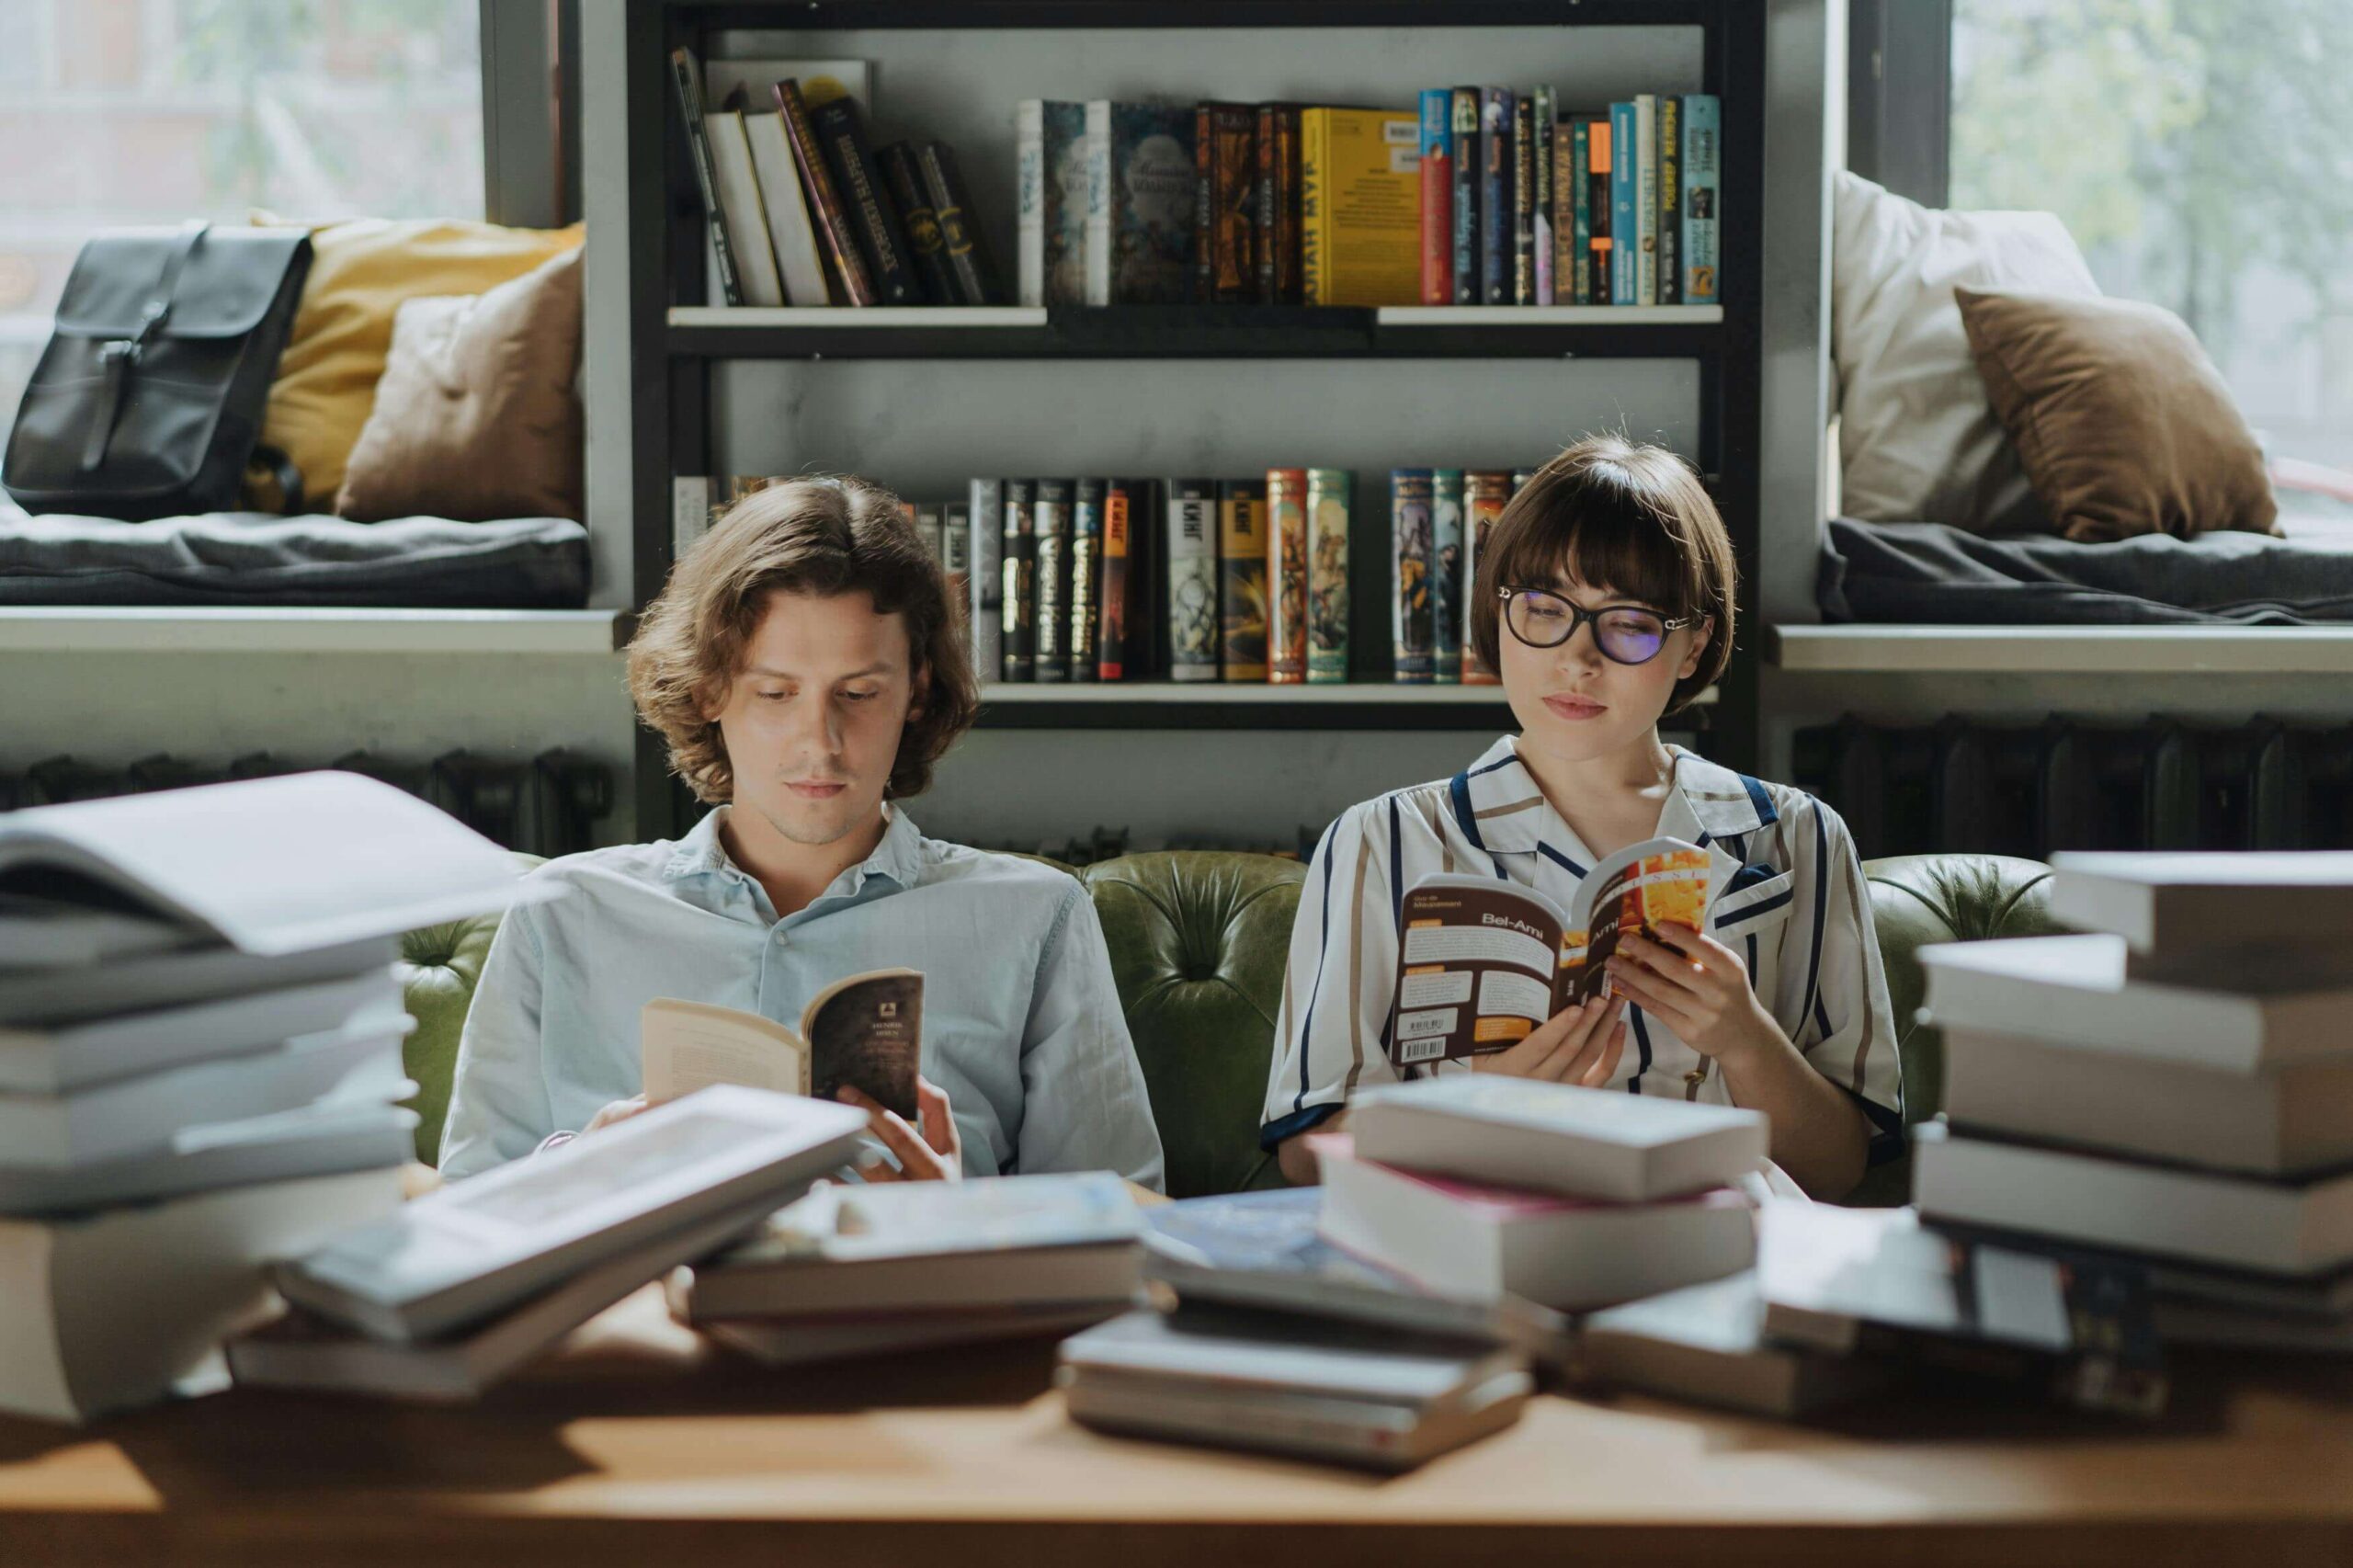 Two introverted friends sitting reading a book trying to make meaningful connections